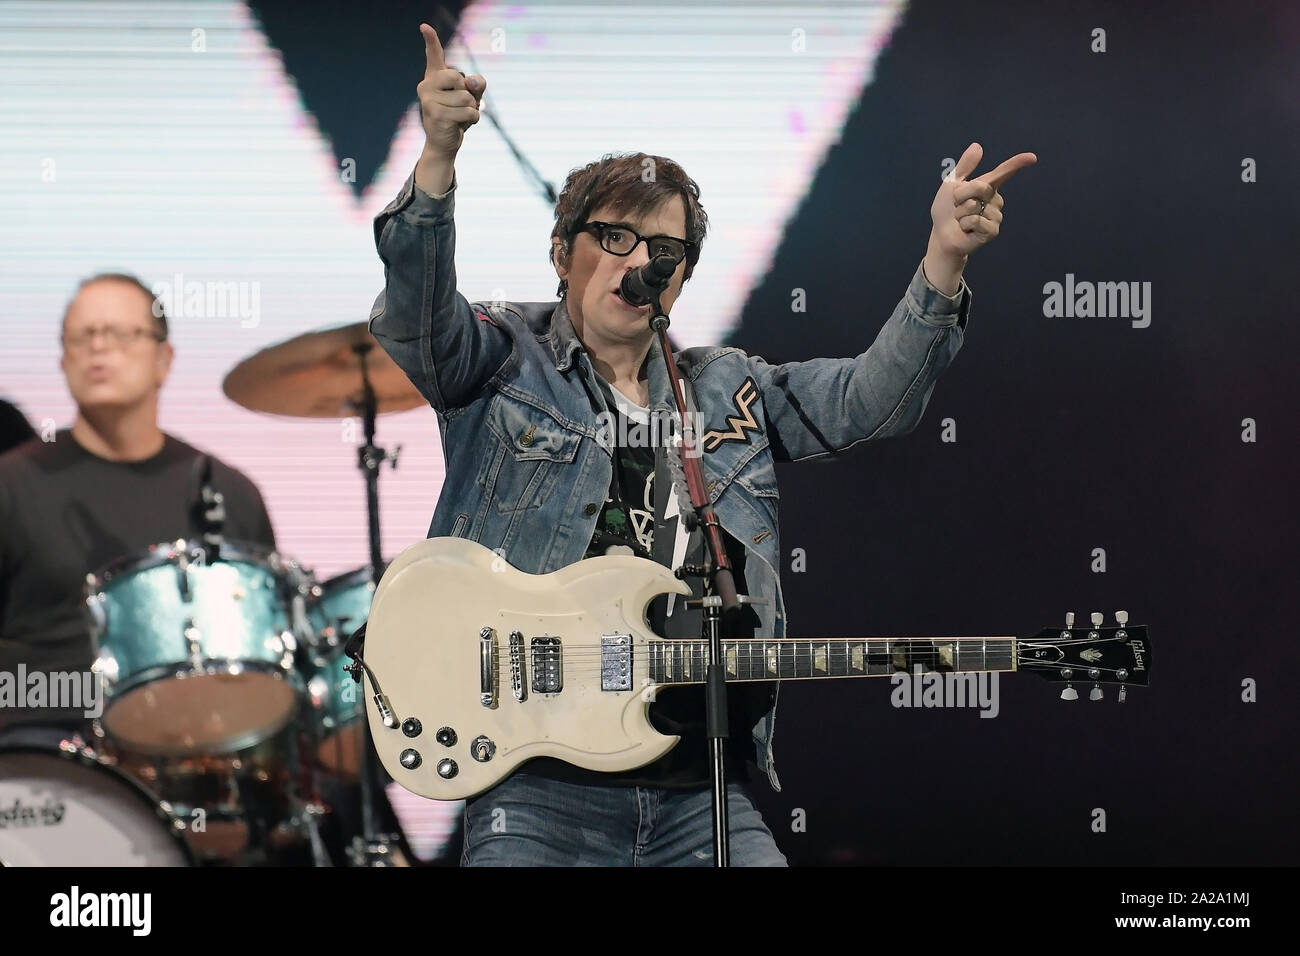 Rio de Janeiro, Brazil, September 29, 2019. Vocalist and Guitarist Rivers Cuomo of the band Weezer during a concert at Rock in Rio in Rio de Janeiro. Stock Photo